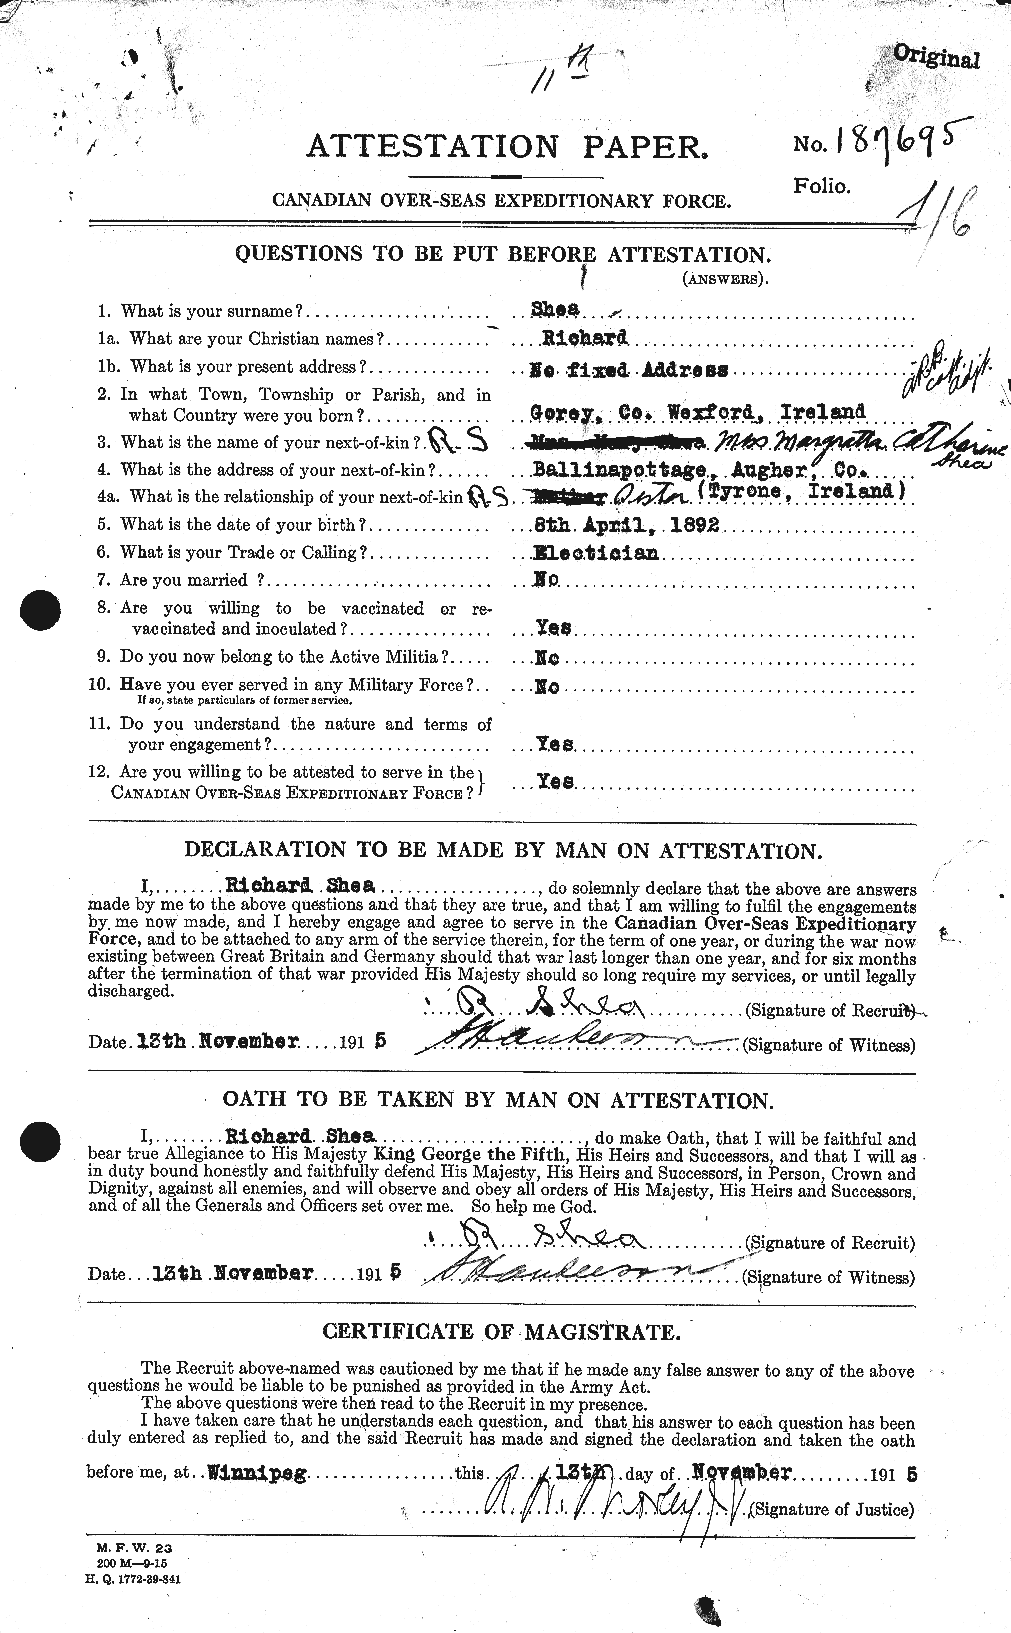 Personnel Records of the First World War - CEF 088316a